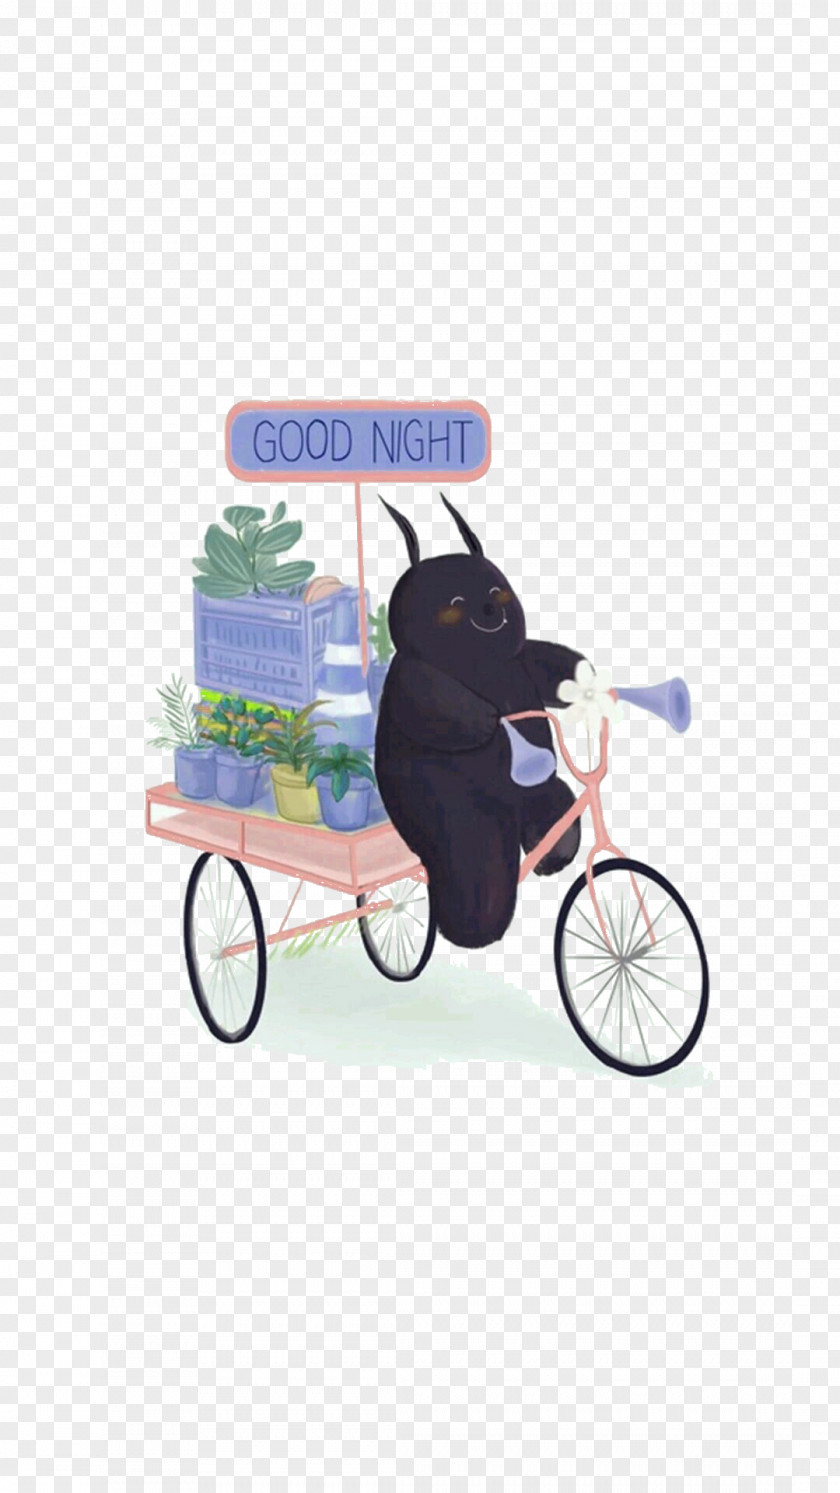 Riding A Rabbit Download Illustration PNG